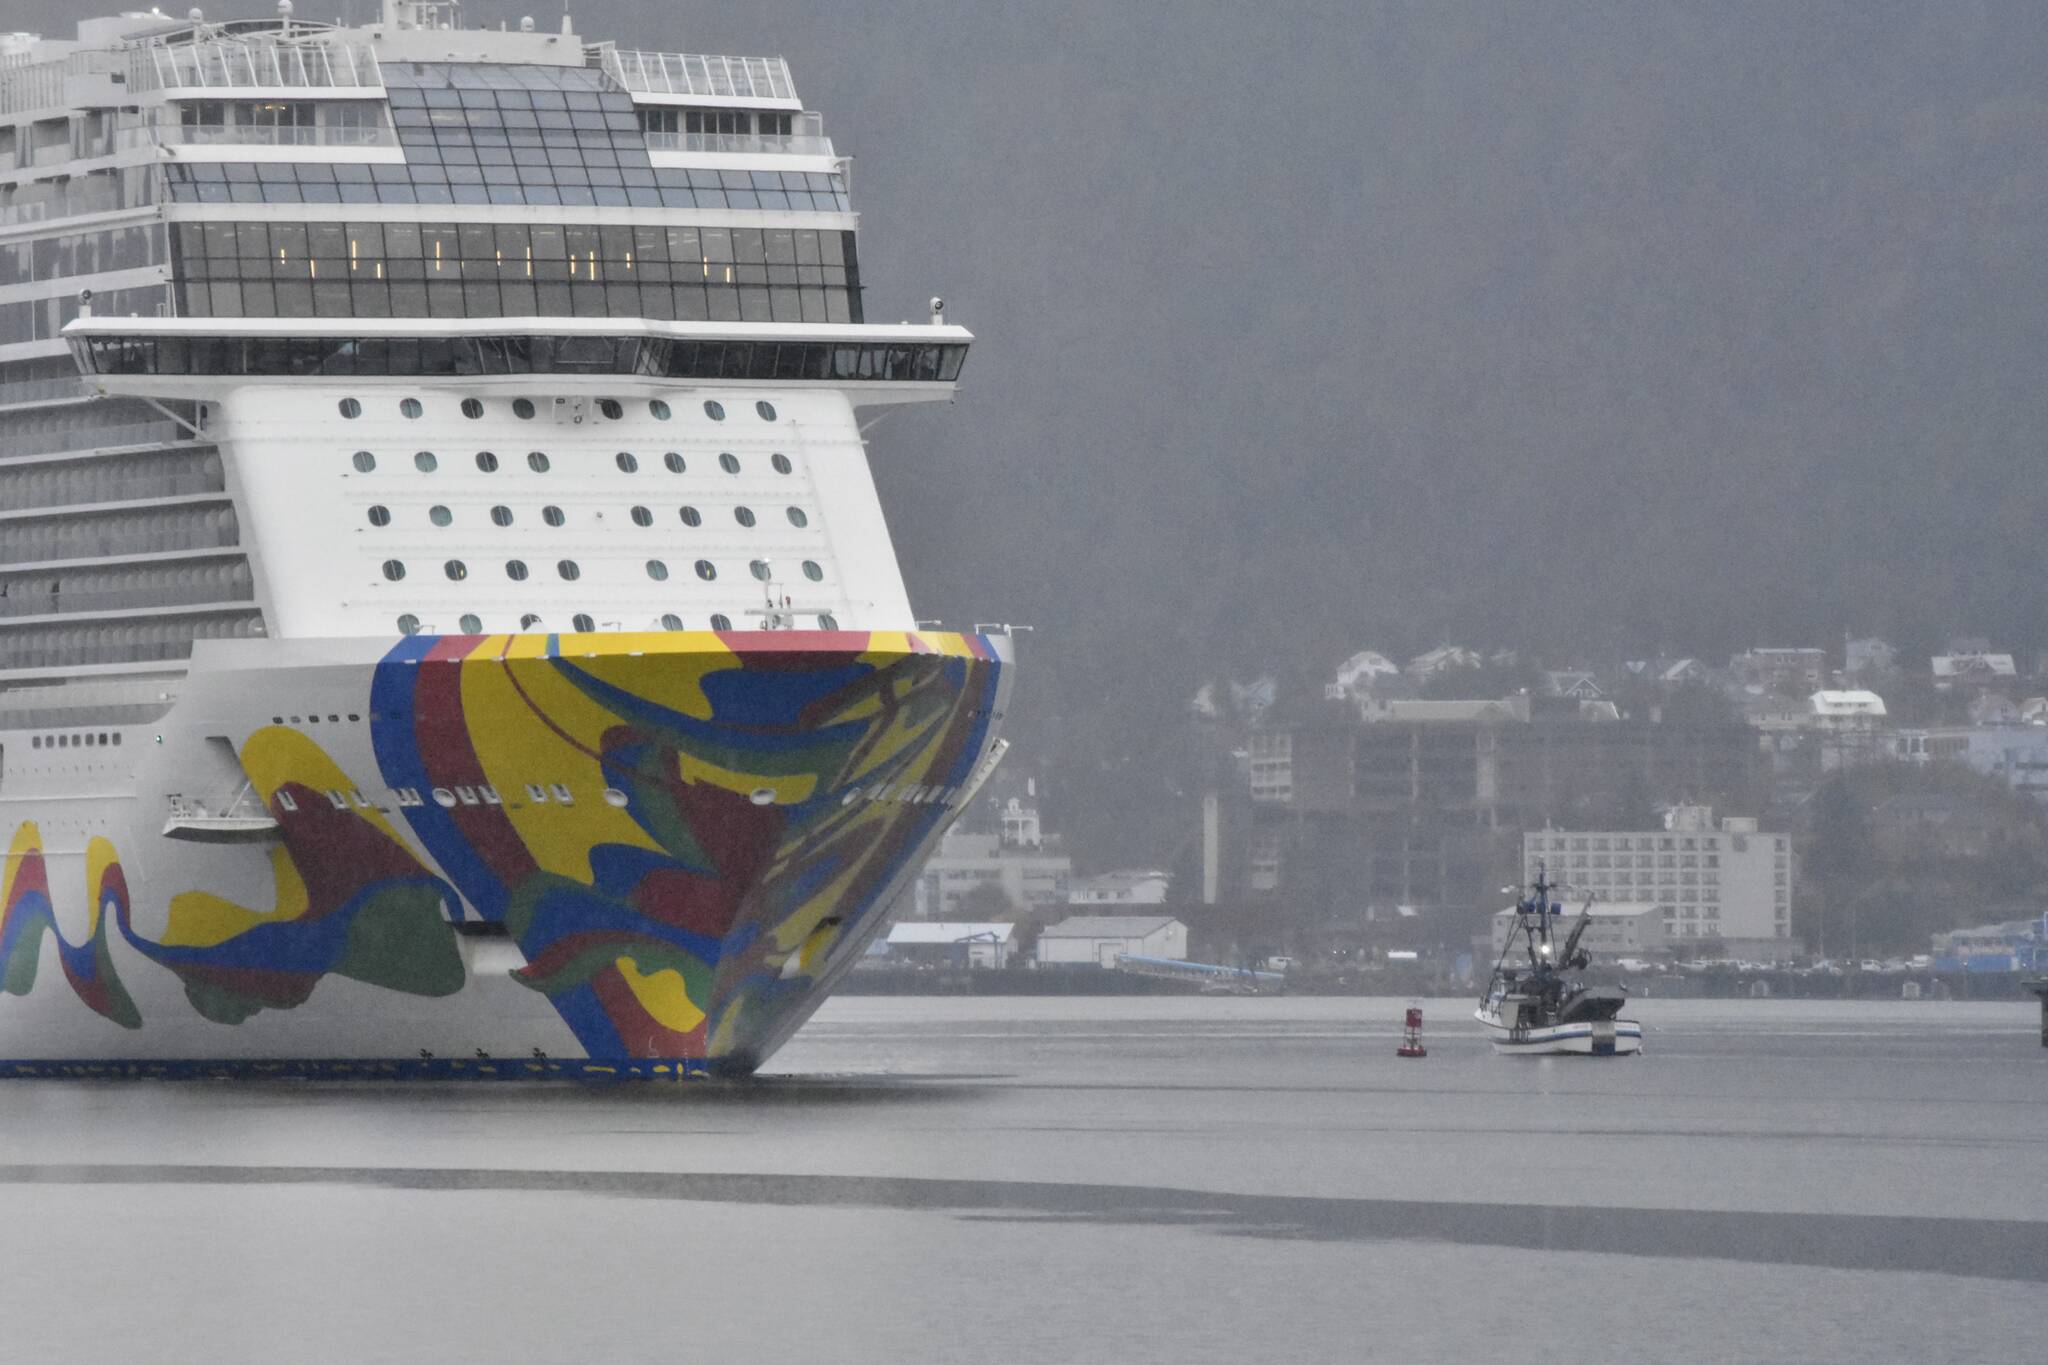 Peter Segall / Juneau Empire 
The last cruise ship of the year, the Norwegian Encore, sails out of Juneau on Wednesday, Oct., 20, 2021, ending a cruise ship season that almost didn’t happen. Despite a smaller season this year, local officials expect a robust season in 2022.